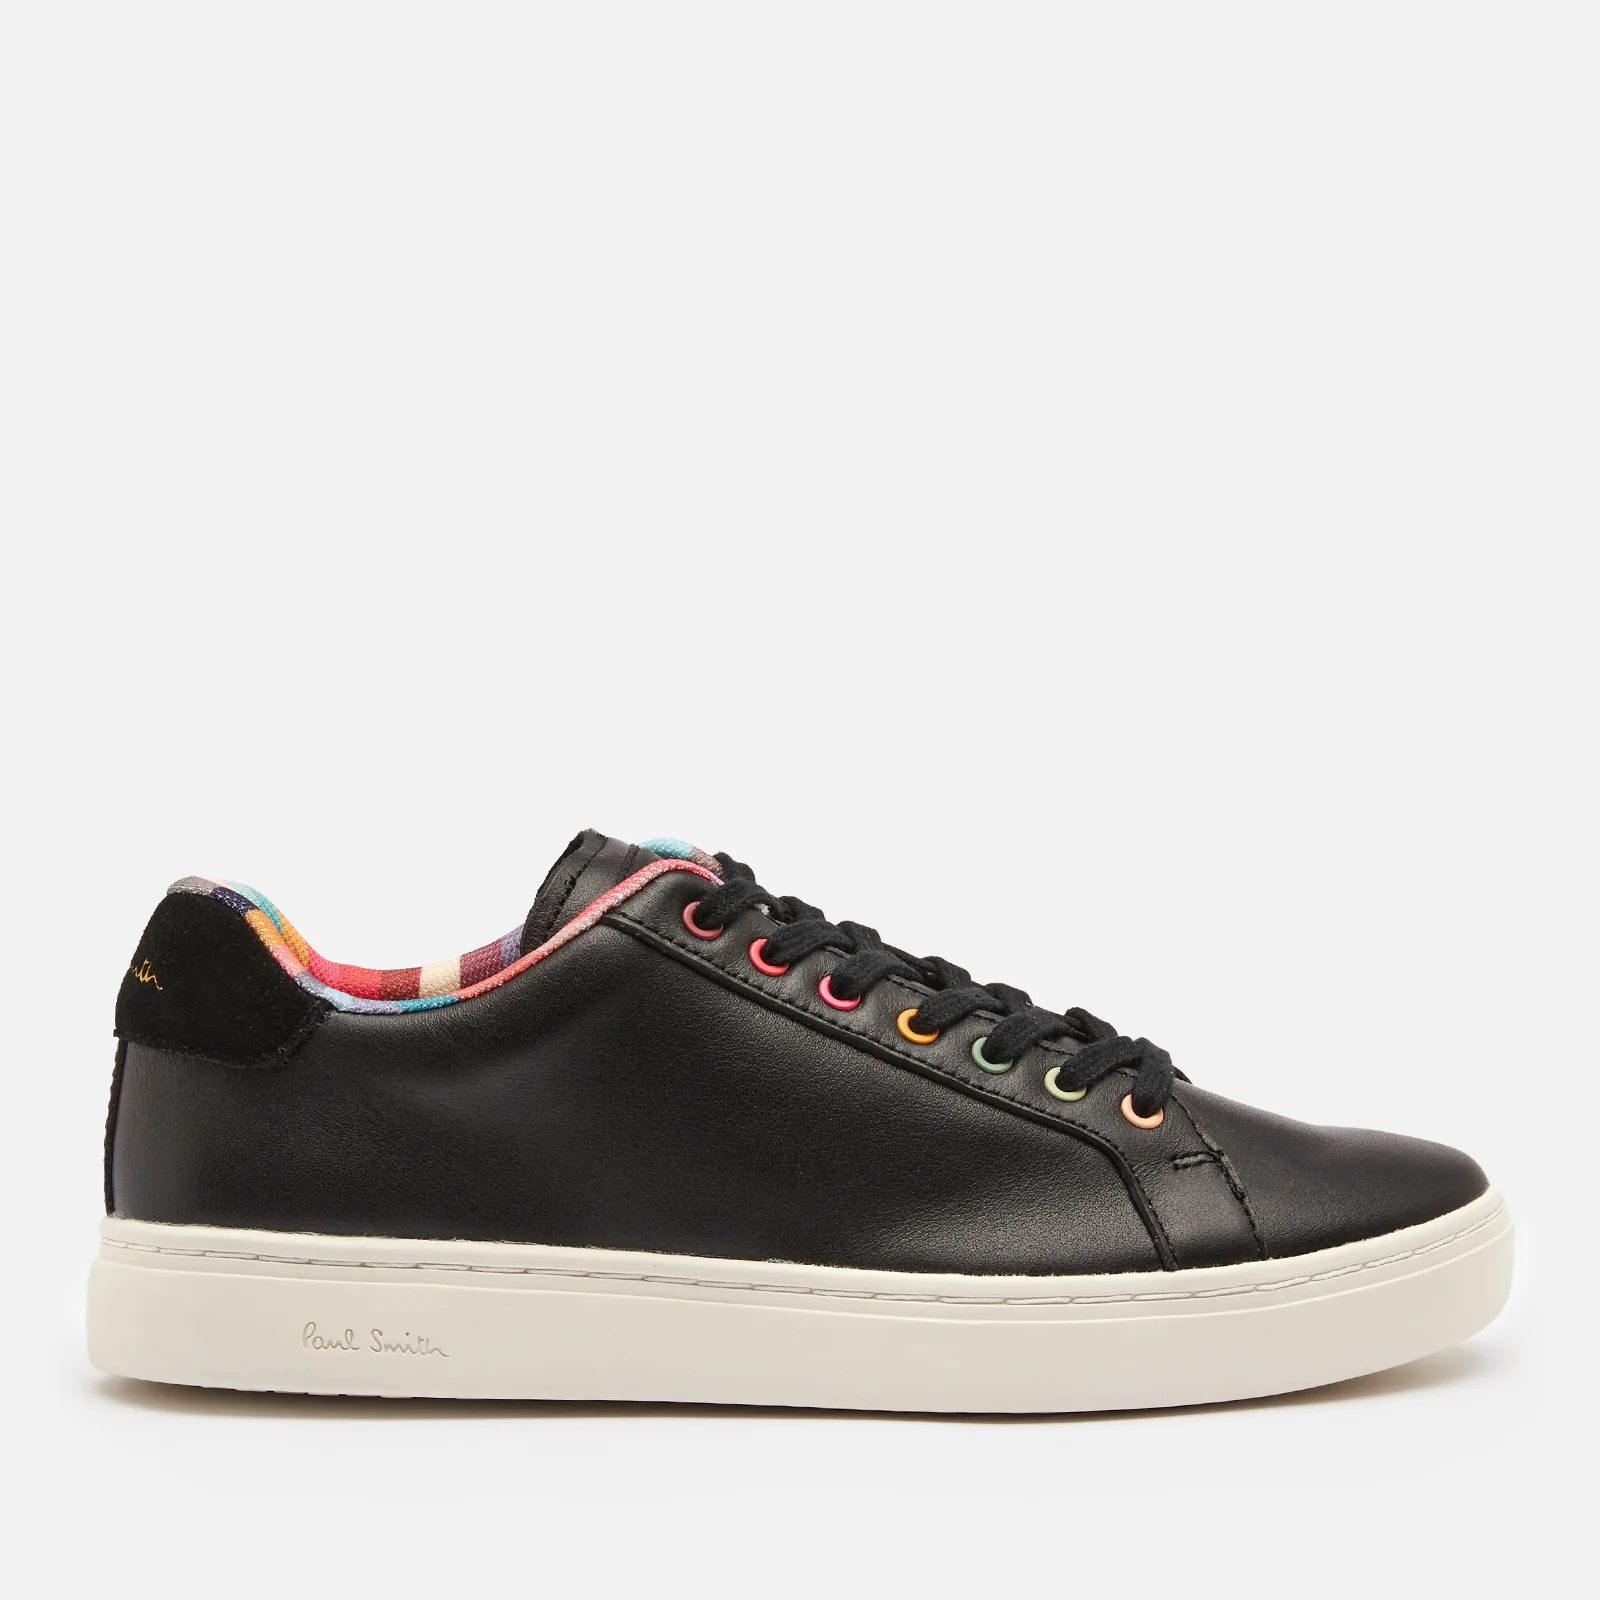 Paul Smith Women's Lapin Leather Cupsole Trainers - Black Image 1